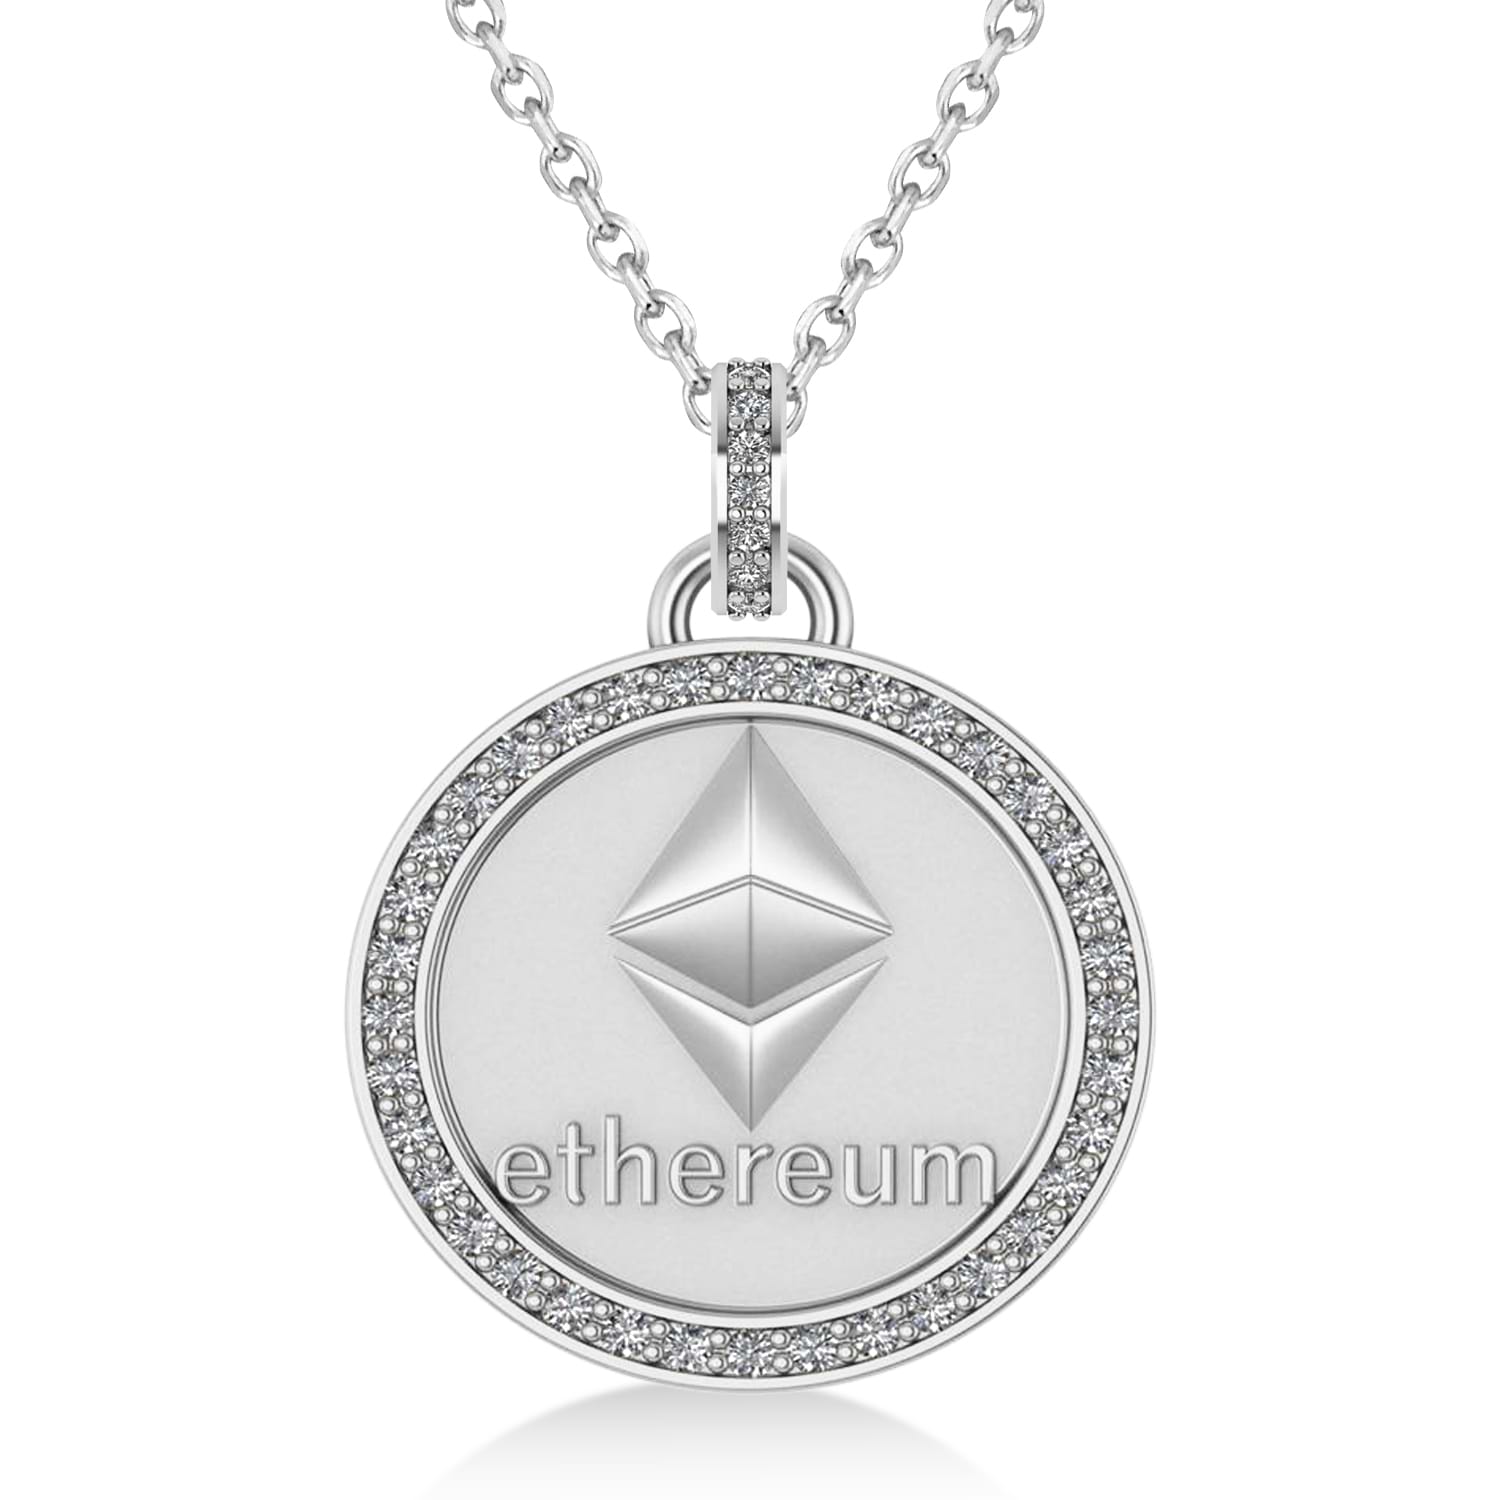 Diamond Cryptocurrency Ethereum Pendant Necklace With Bail 14k White Gold (0.44ct)